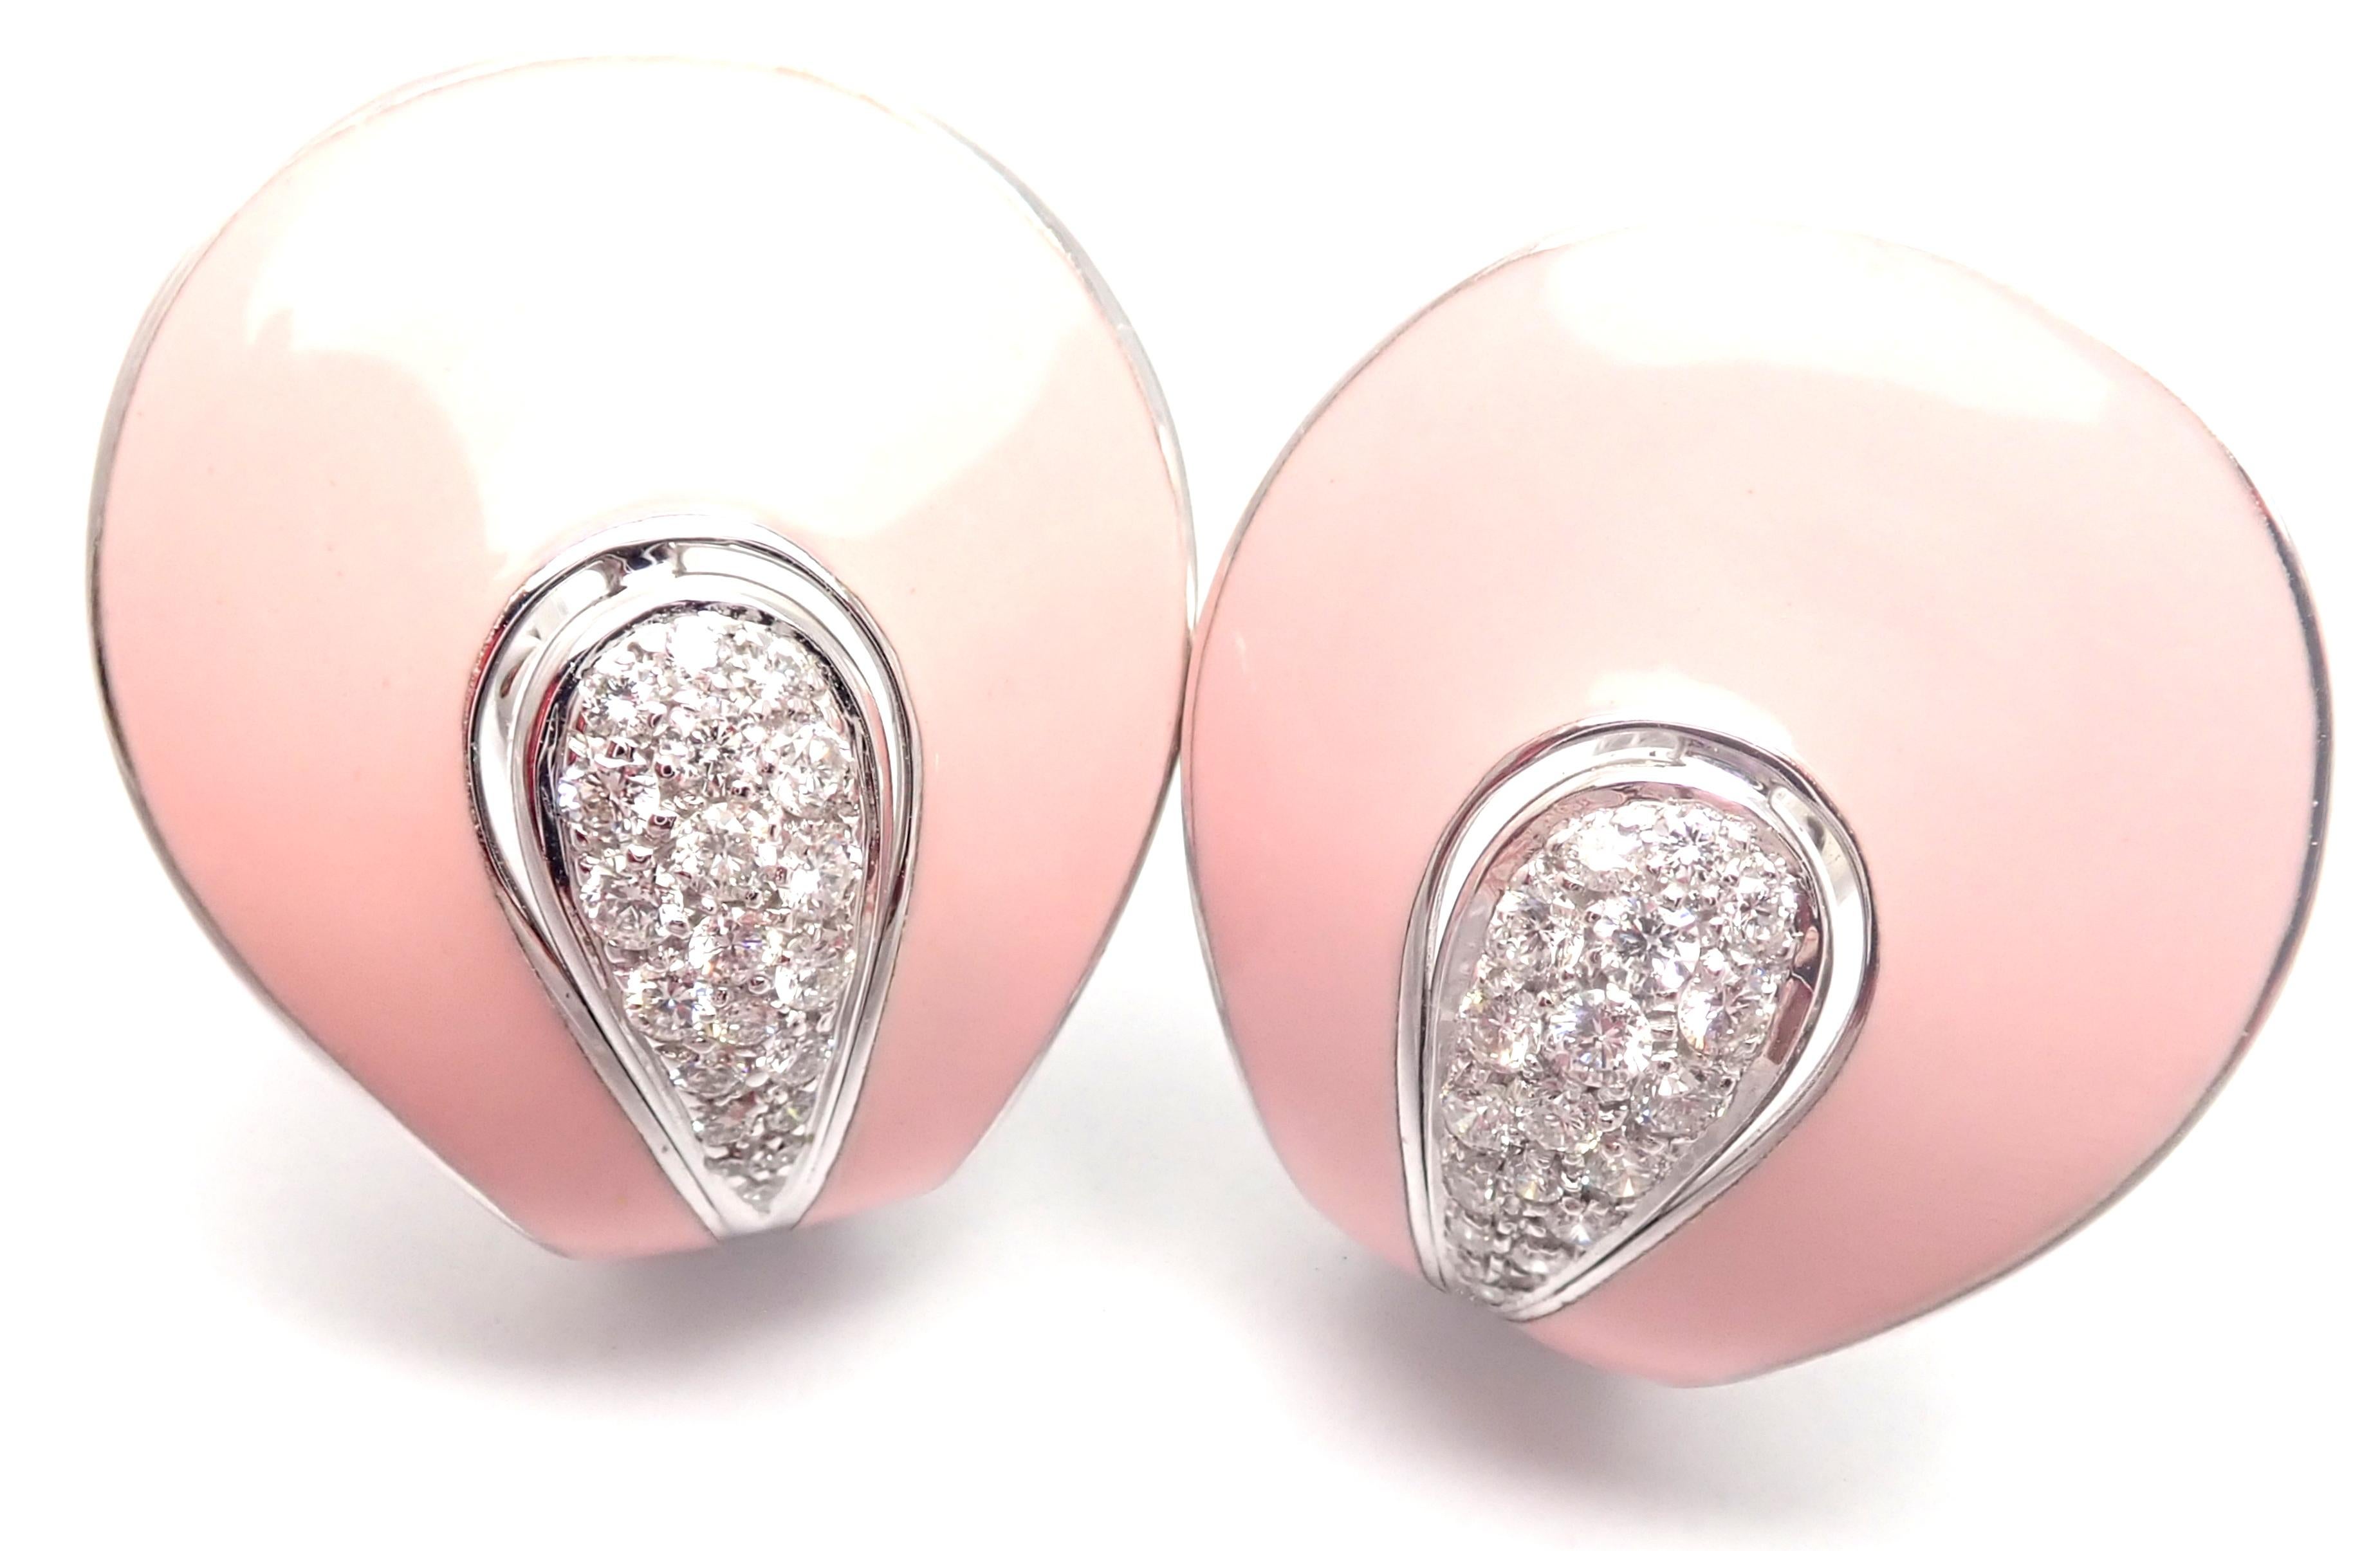 18k White Gold Pink Enamel Diamond Liberty Earrings by Roberto Coin.
These earrings have collapsable posts so that they can be used for pierced ears and as clips.
With Round diamonds VS1 clarity, G color total weight approximately .55ct
Rose